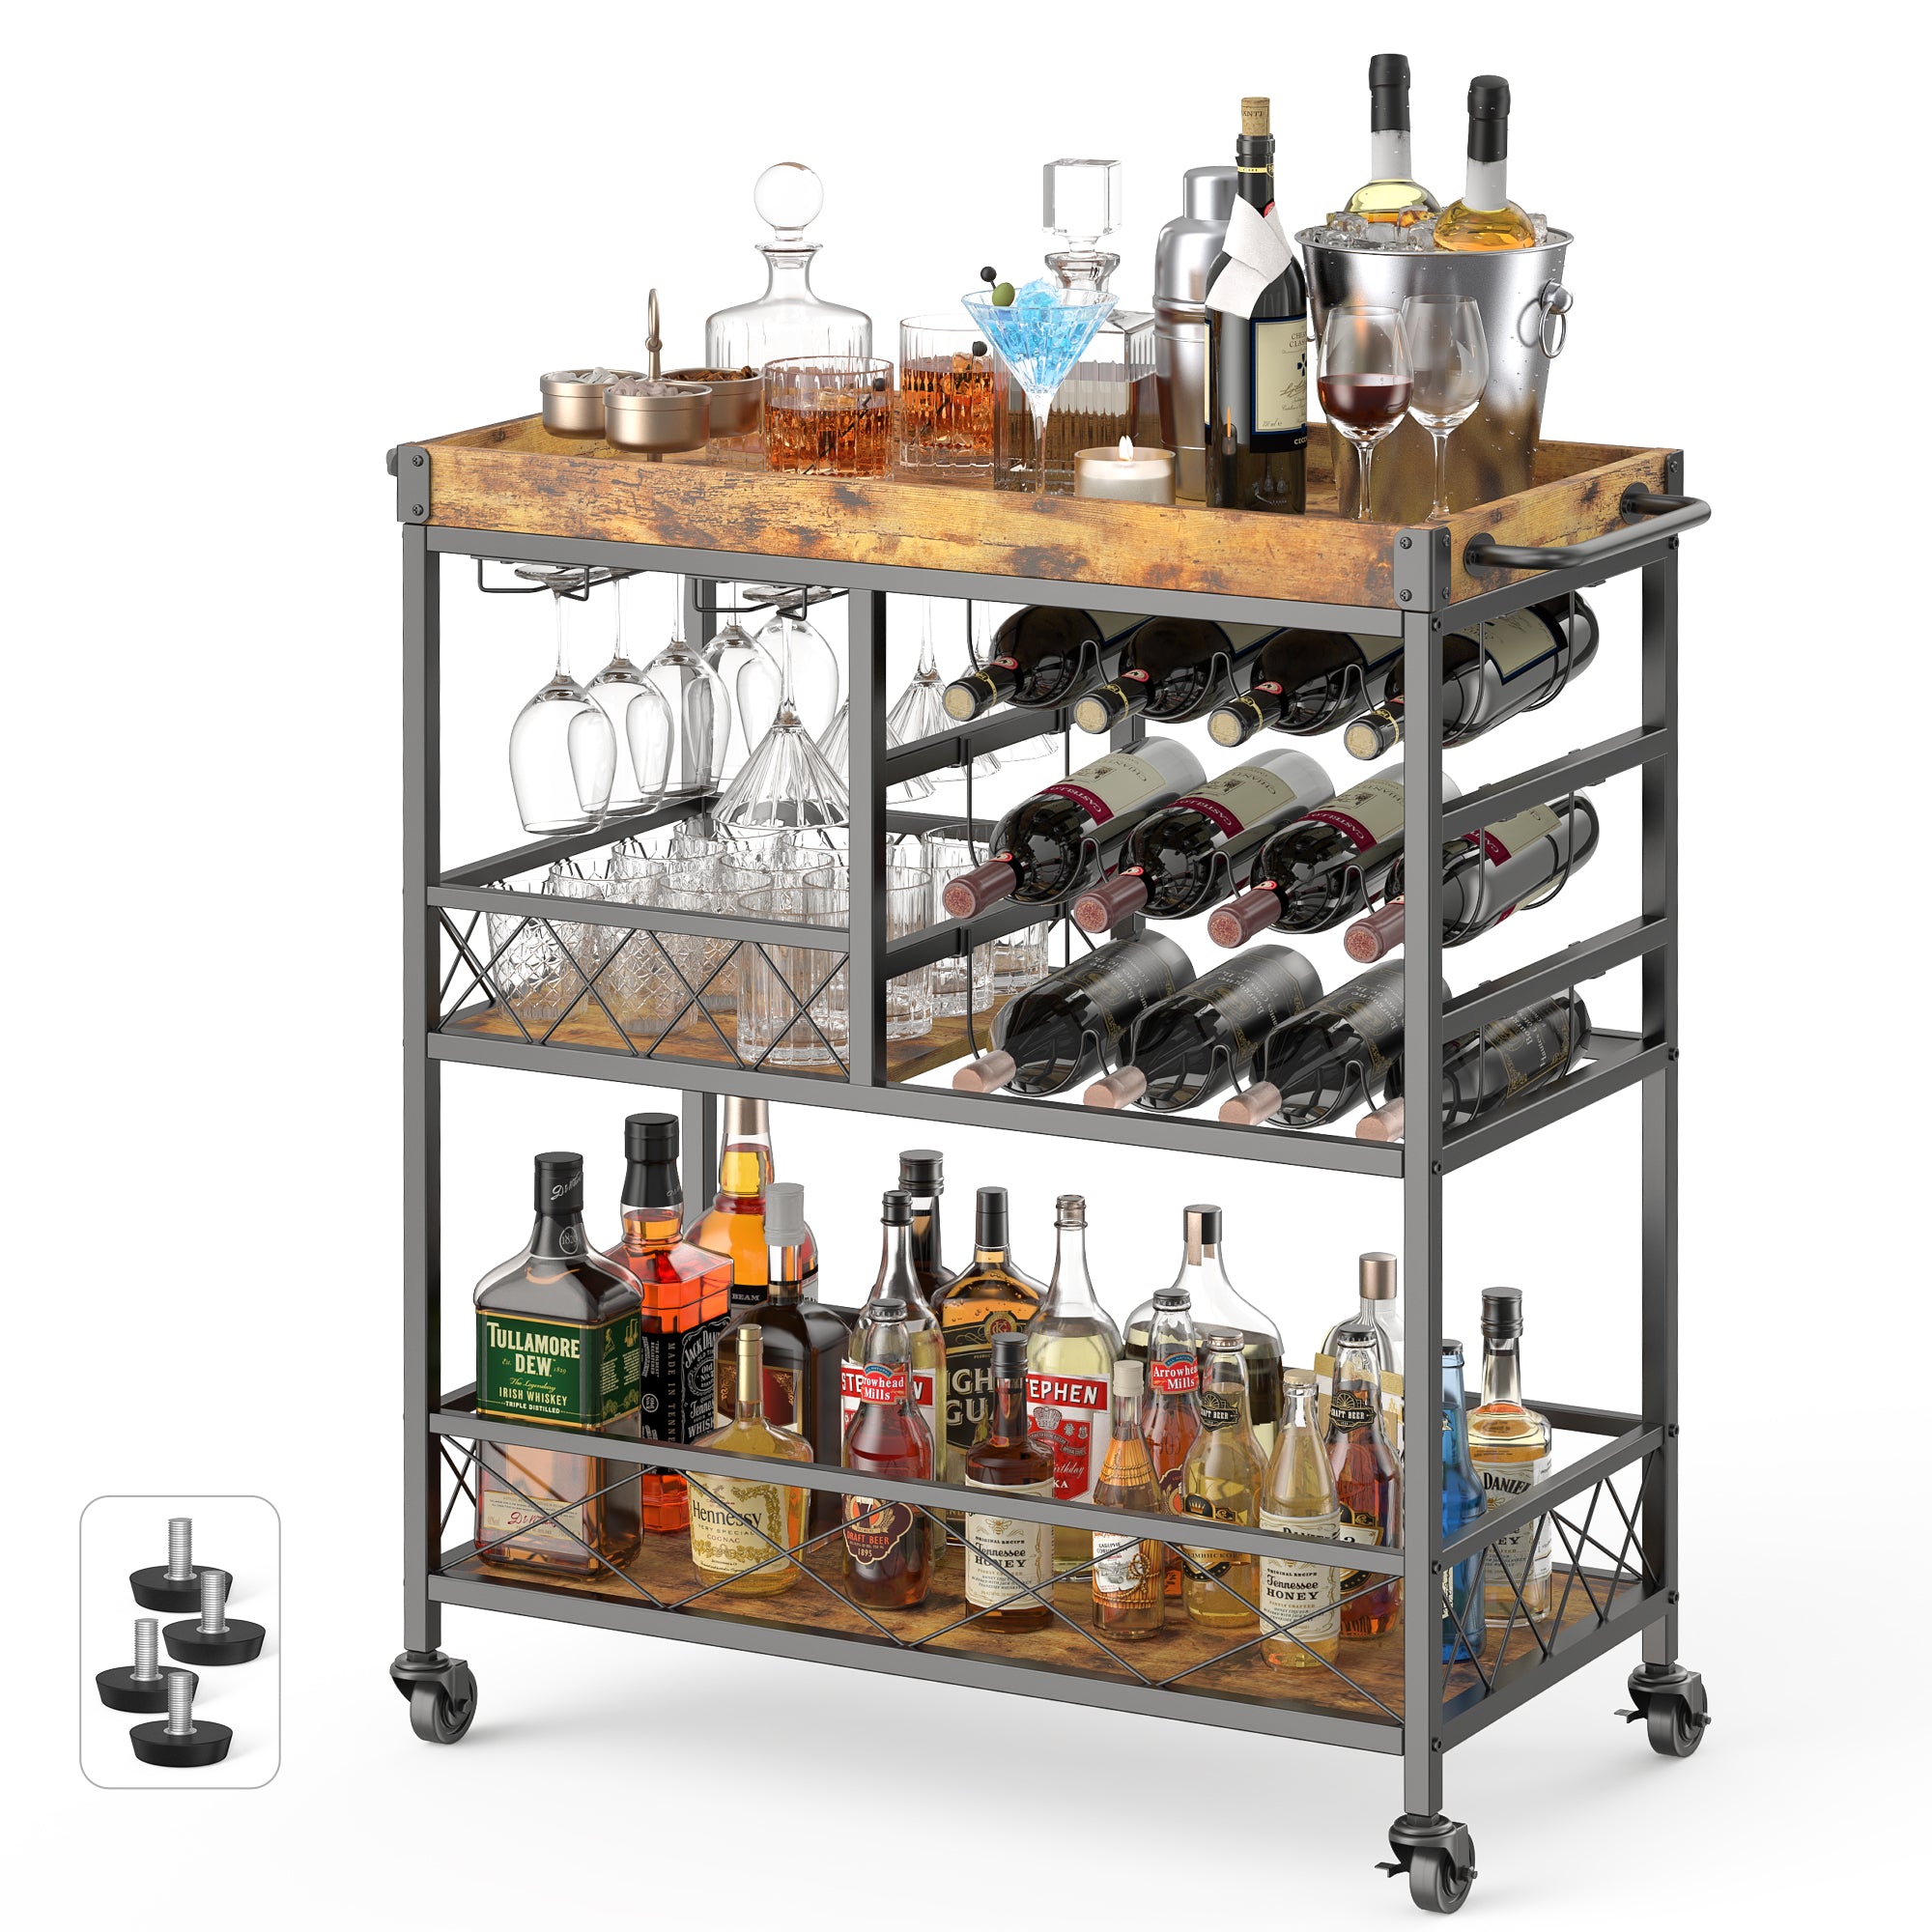 Gizoon AK40 Home Bar Serving Cart with Large Storage Space and Lockable Wheels